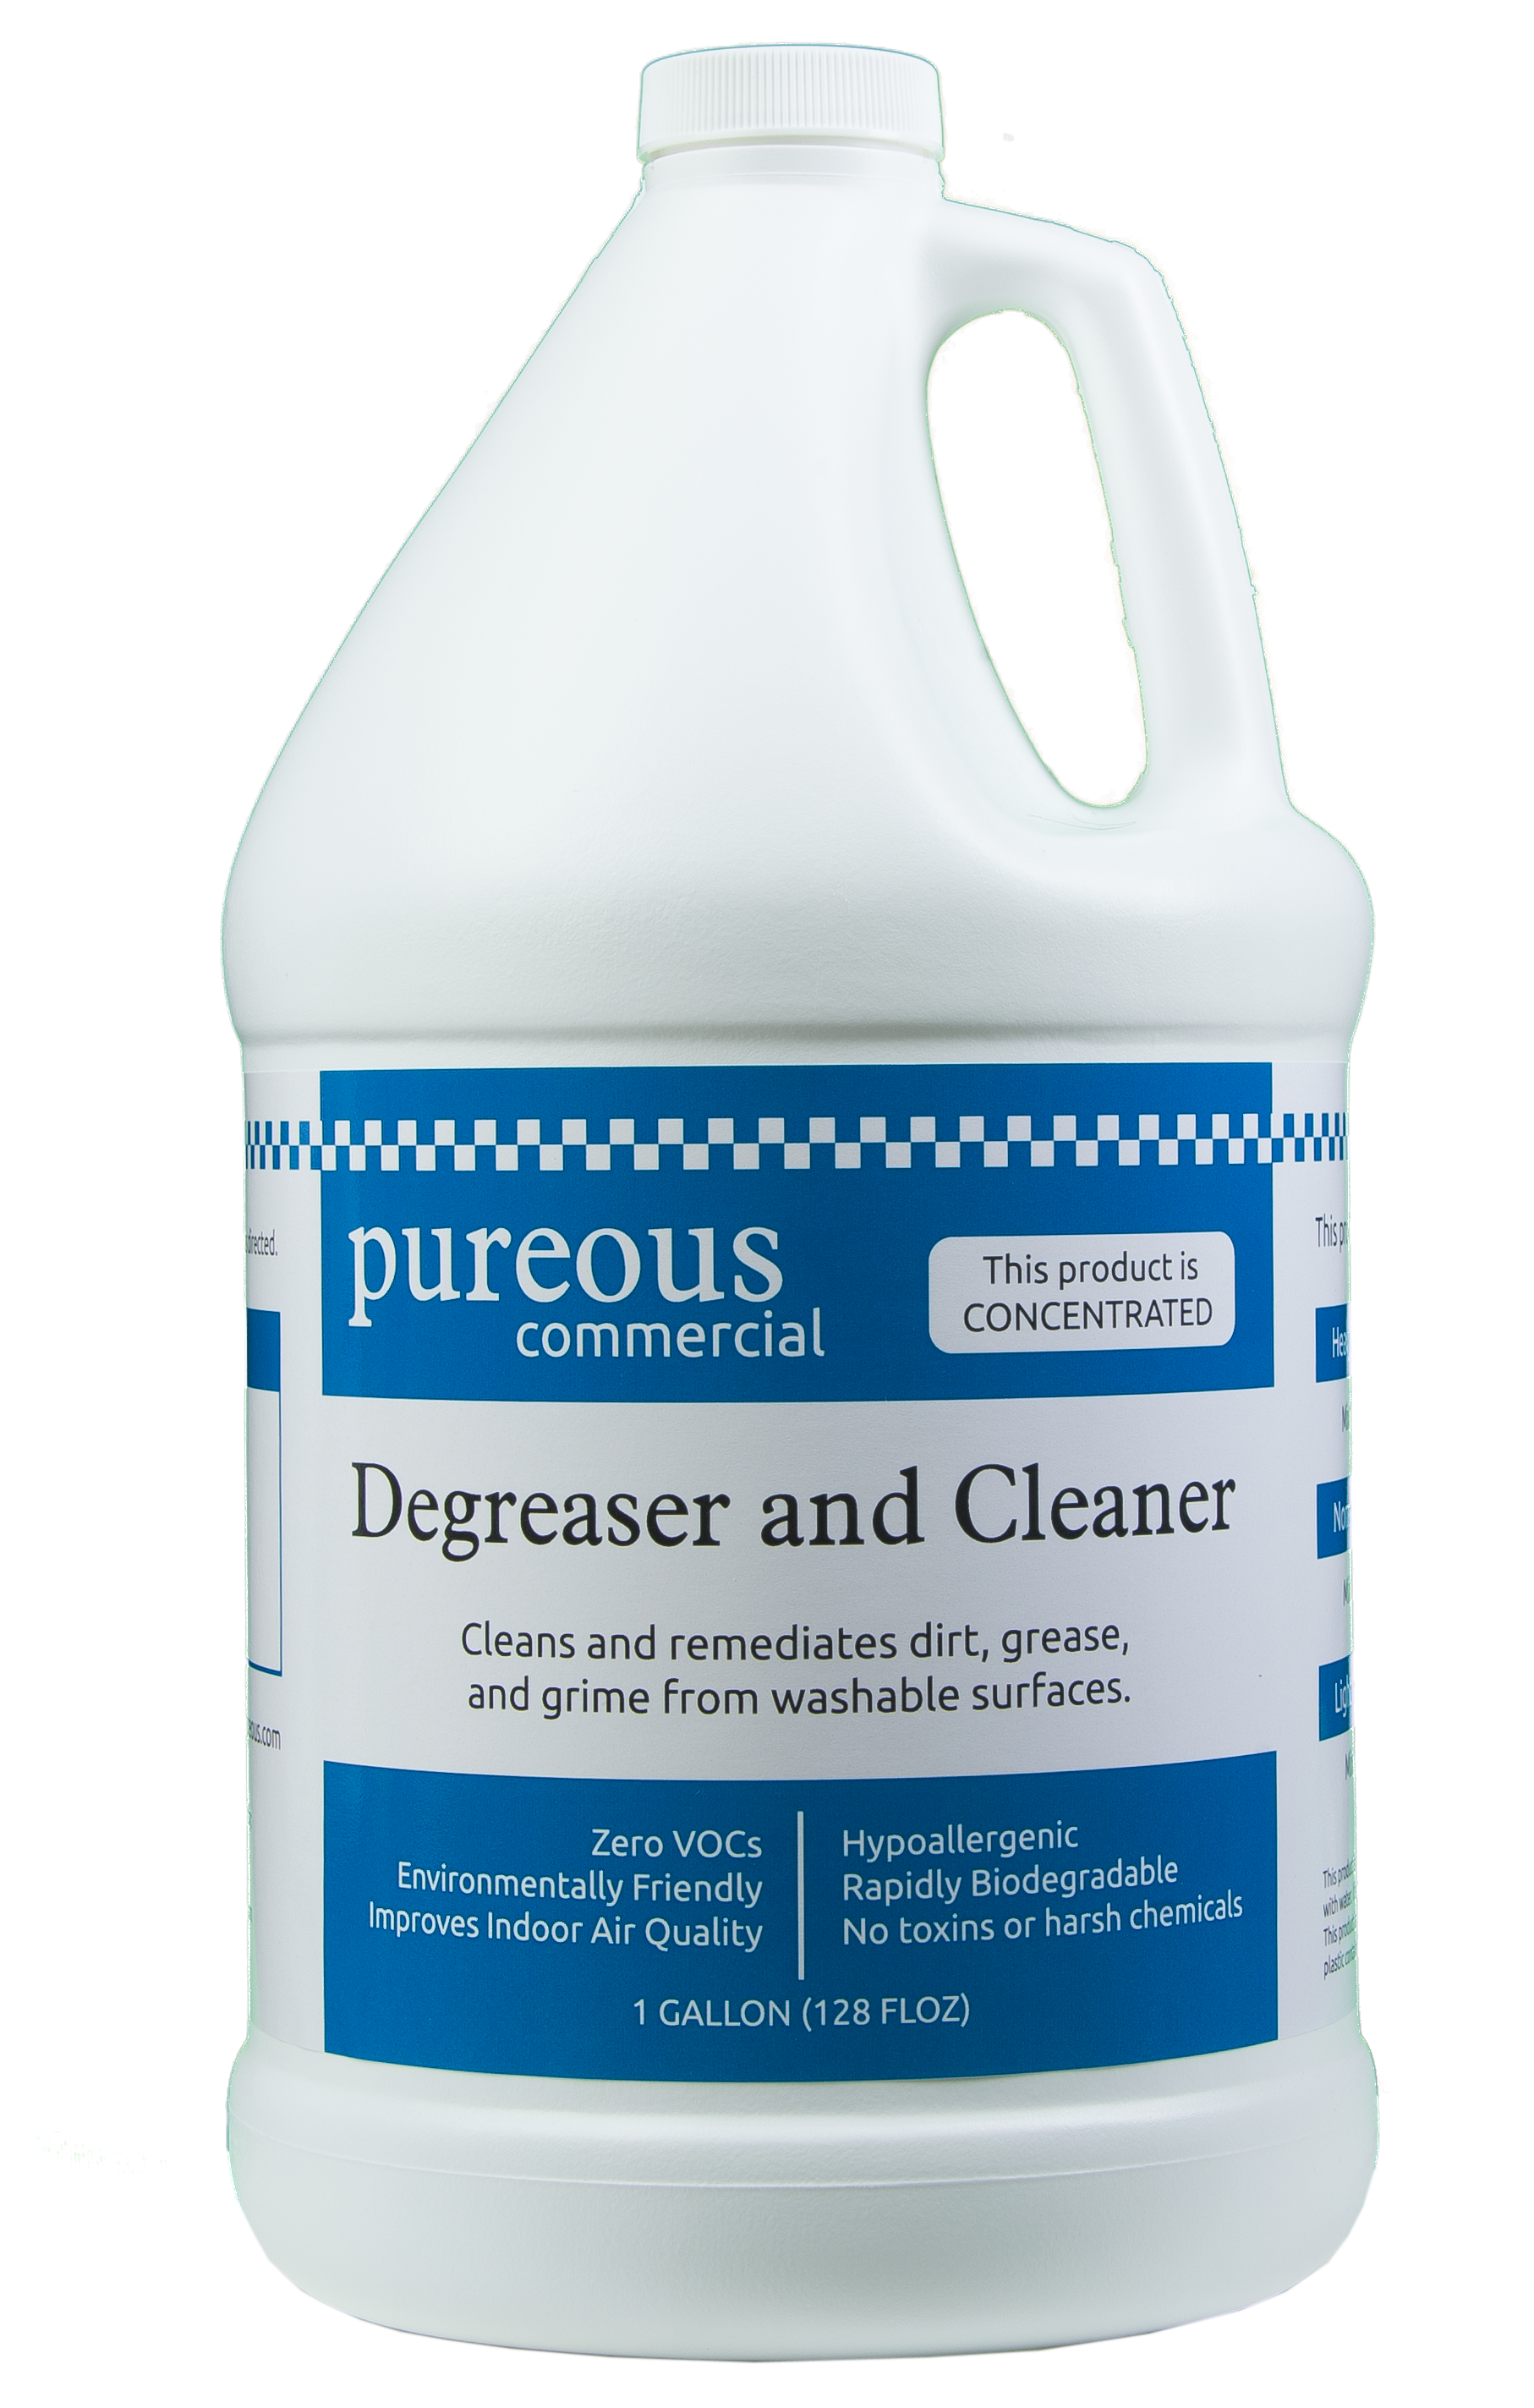 Degreaser and Cleaner